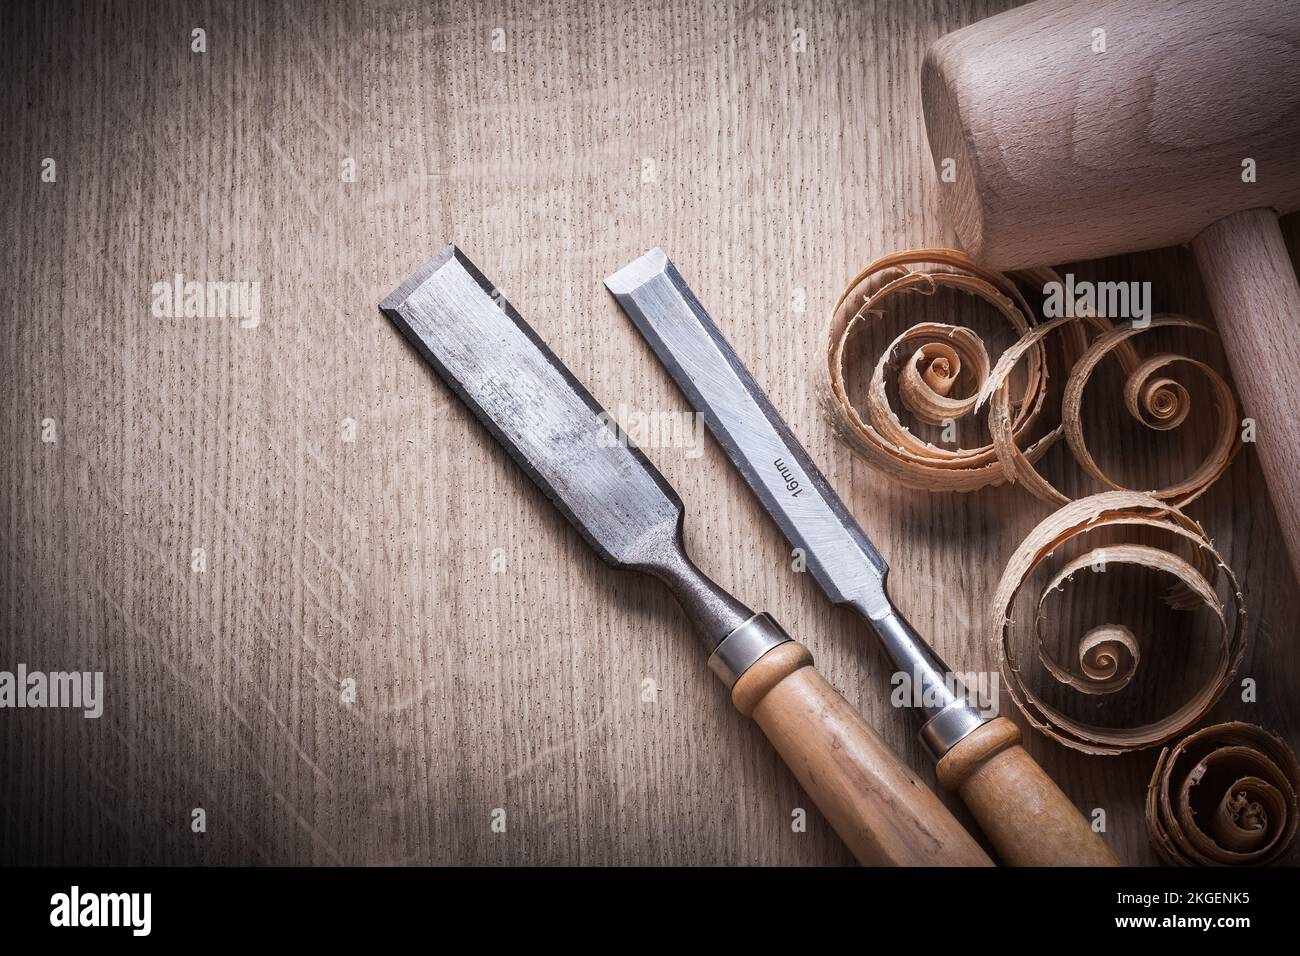 Planing chips wooden mallet carpenter’s flat chisels on wood surface construction concept. Stock Photo